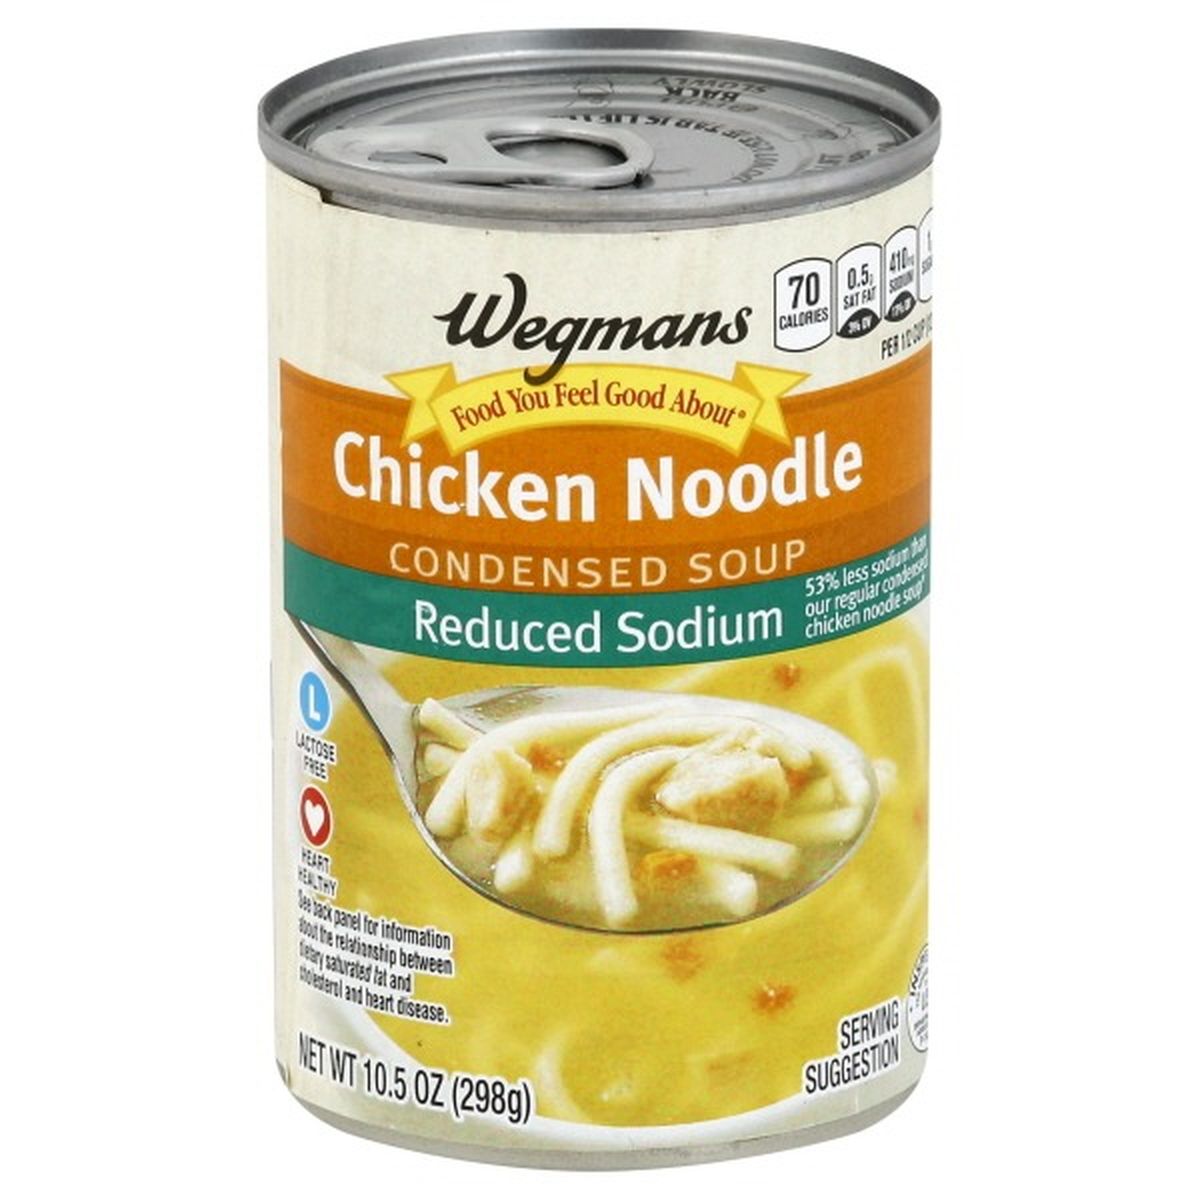 Calories in Wegmans Reduced Sodium Condensed Chicken Noodle Soup